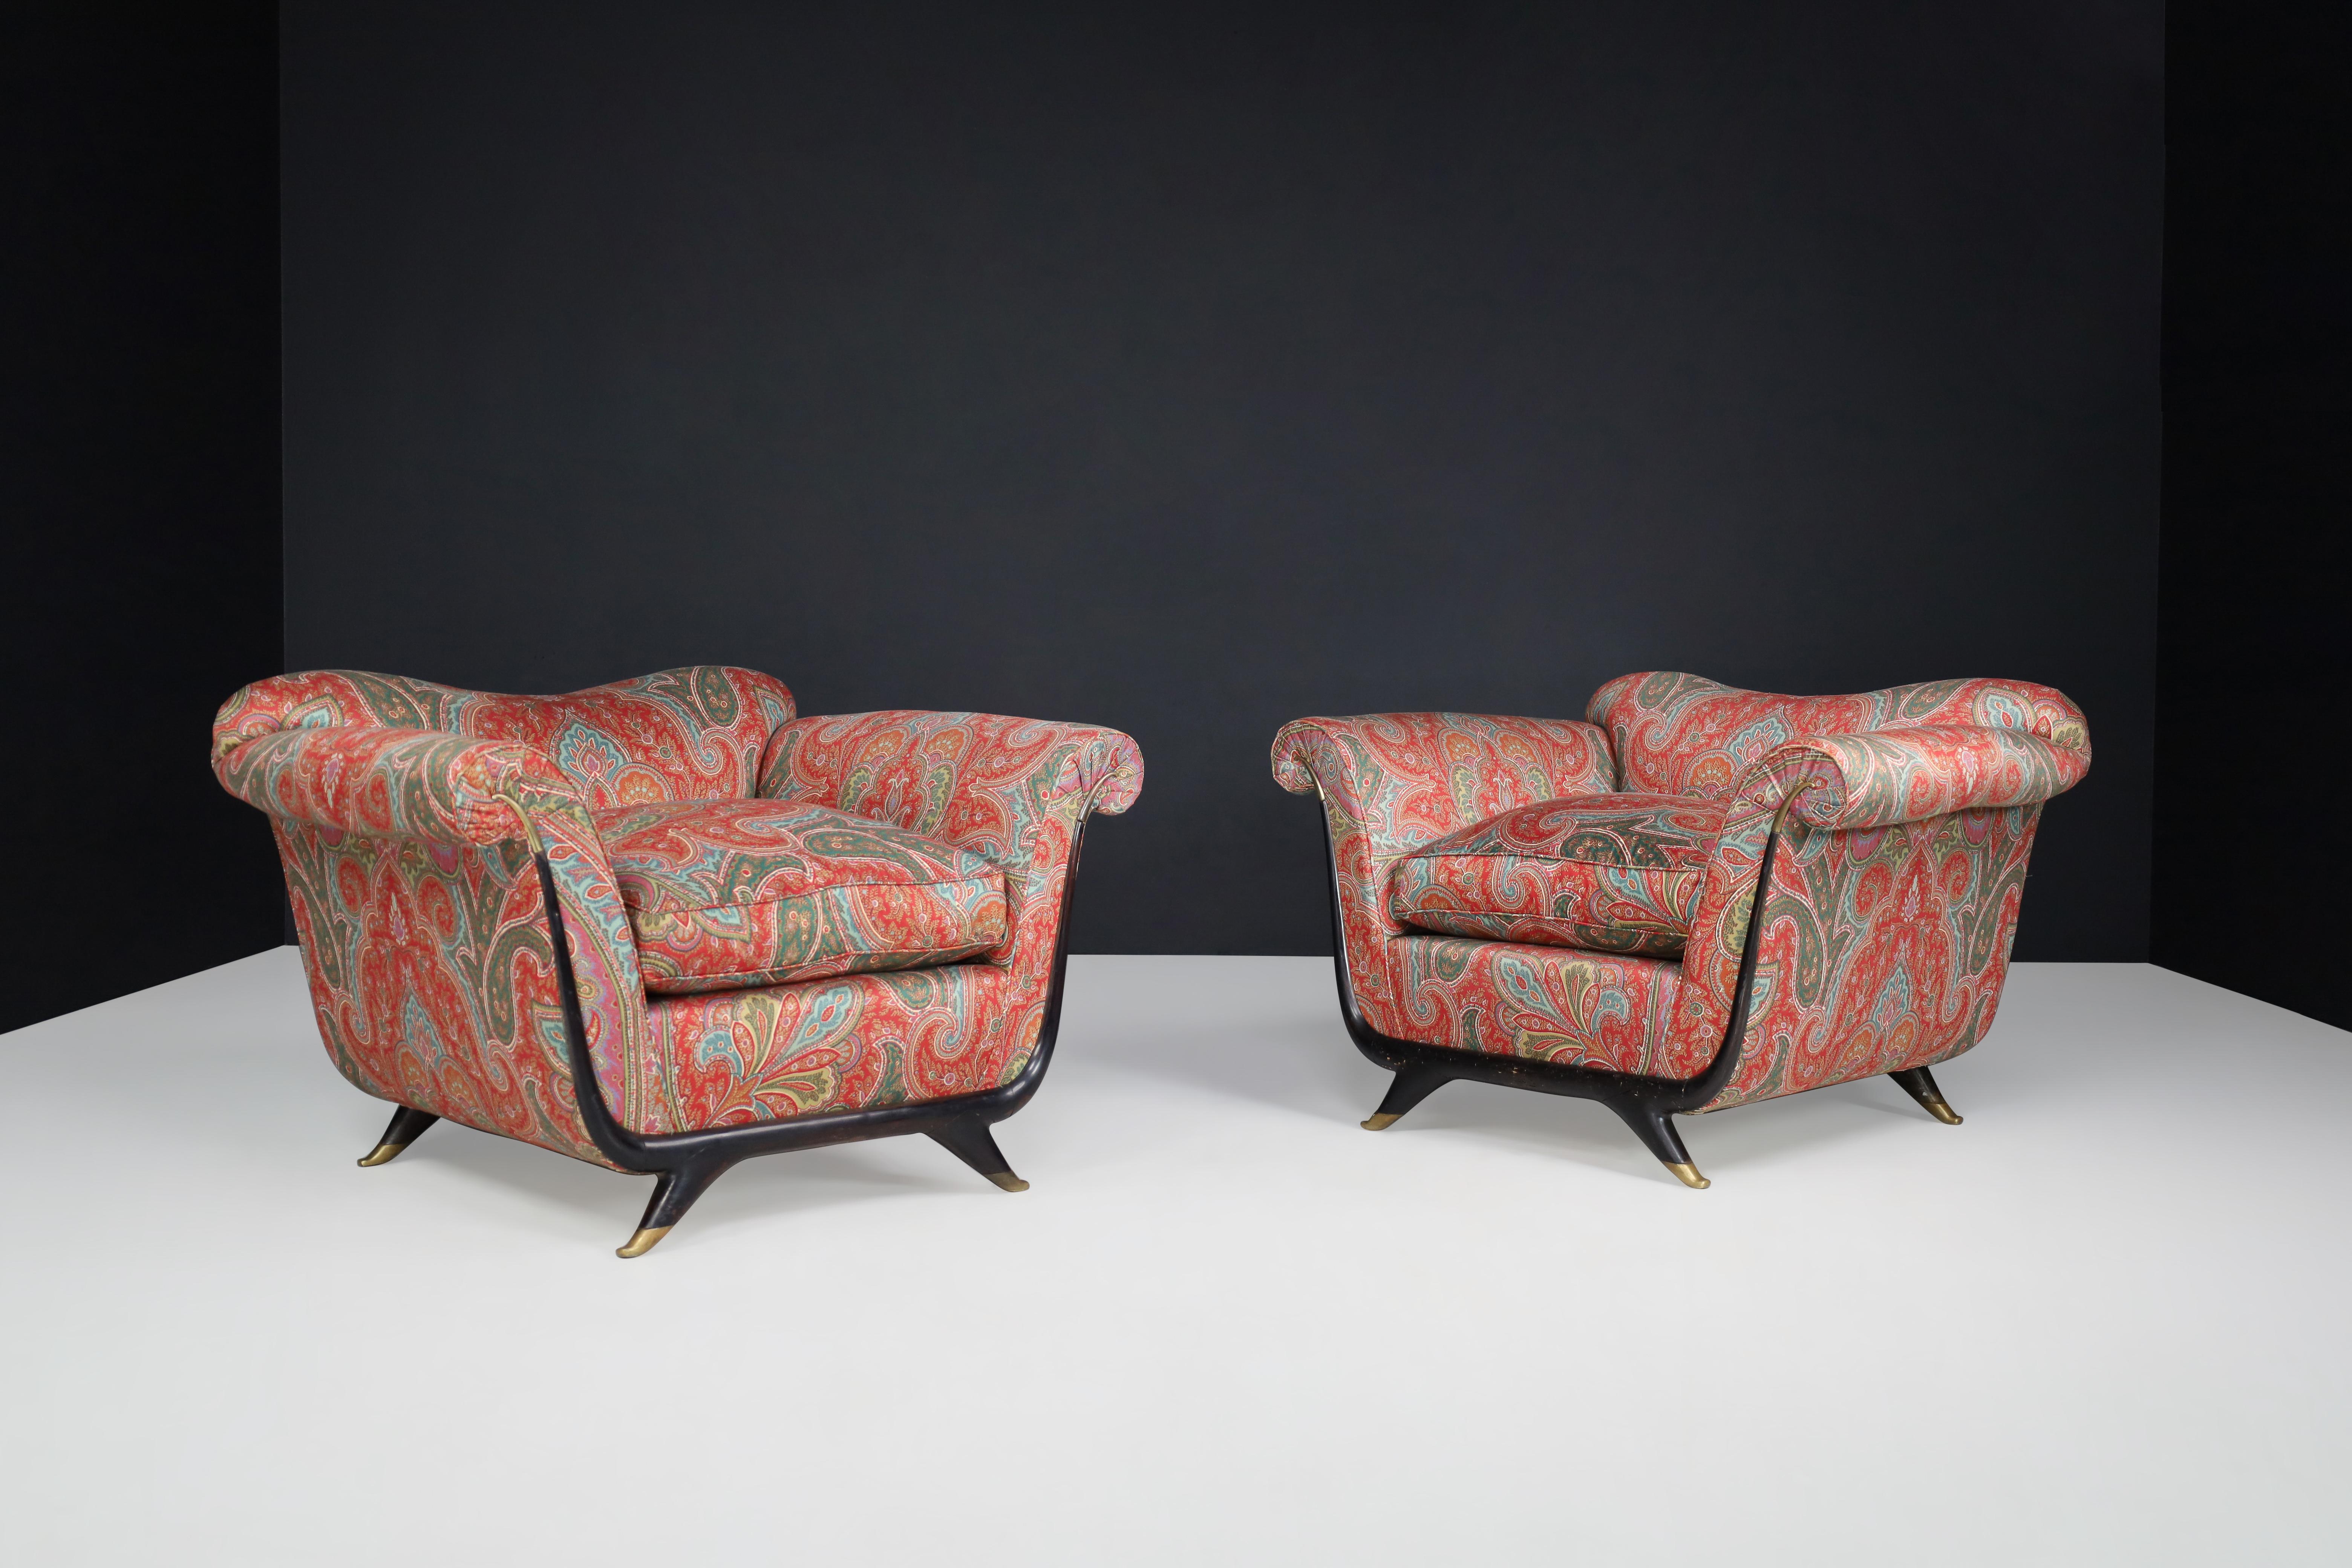 Guglielmo Ulrich Lounge Chairs inWalnut , Fabric, and Brass, Italy 1930s

The renowned architect Guglielmo Ulrich designed a pair of two lounge chairs in Italian classicism, a production of the 1930s. These chairs are an exceptional example of